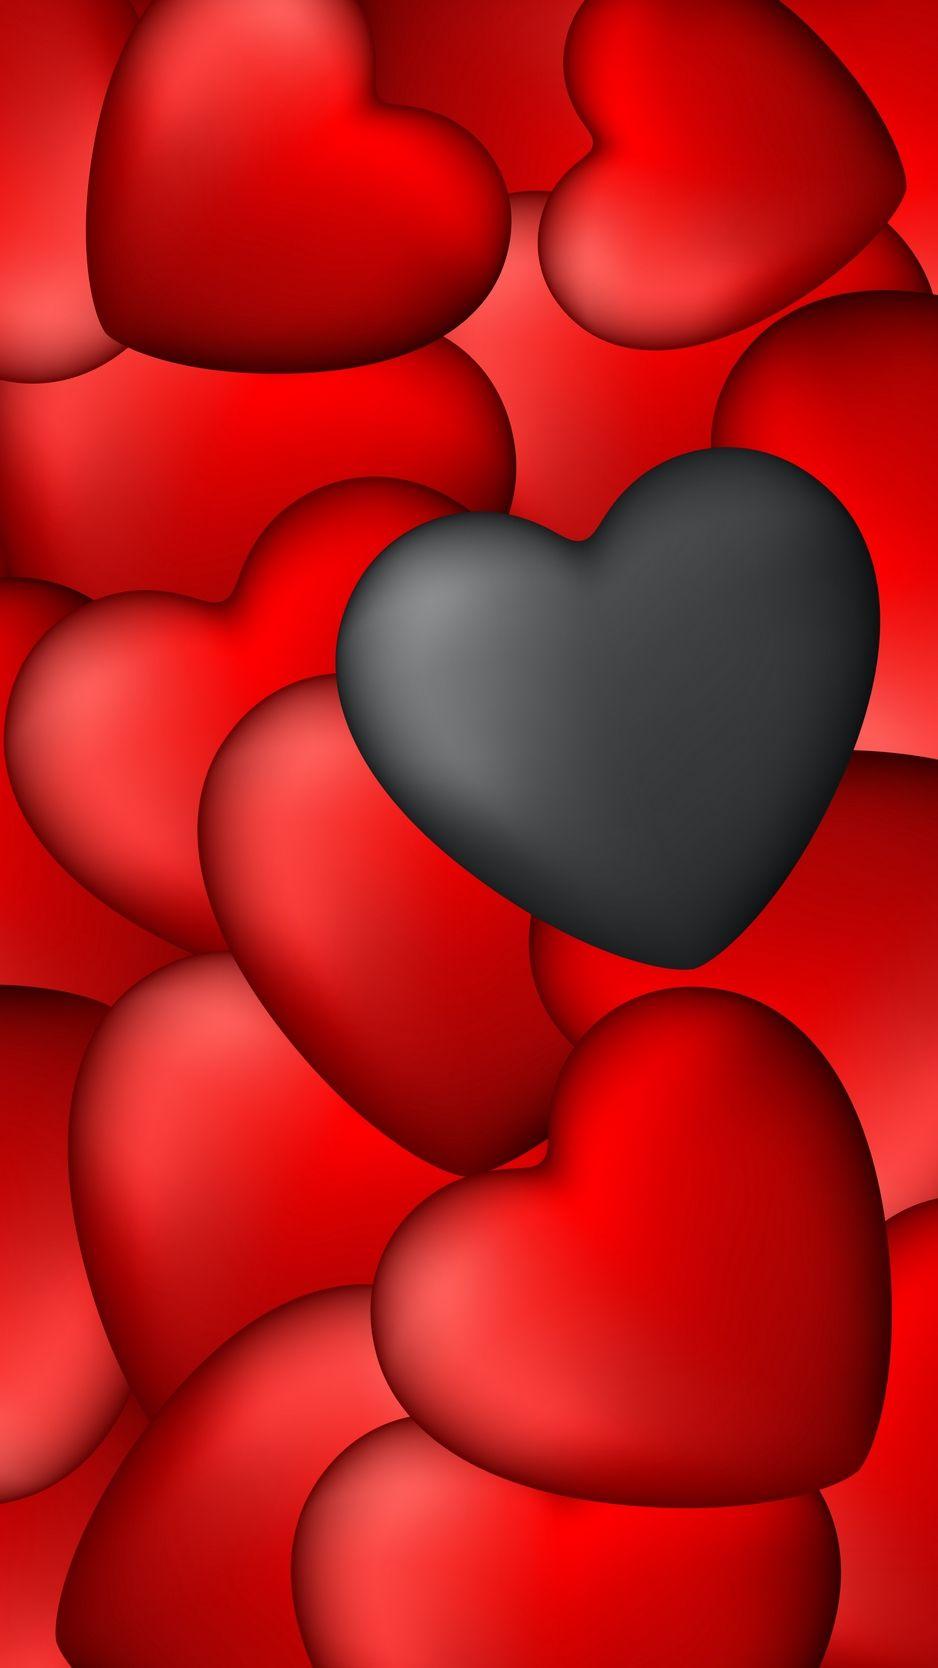 Heart iPhone Wallpaper Free Heart iPhone Background